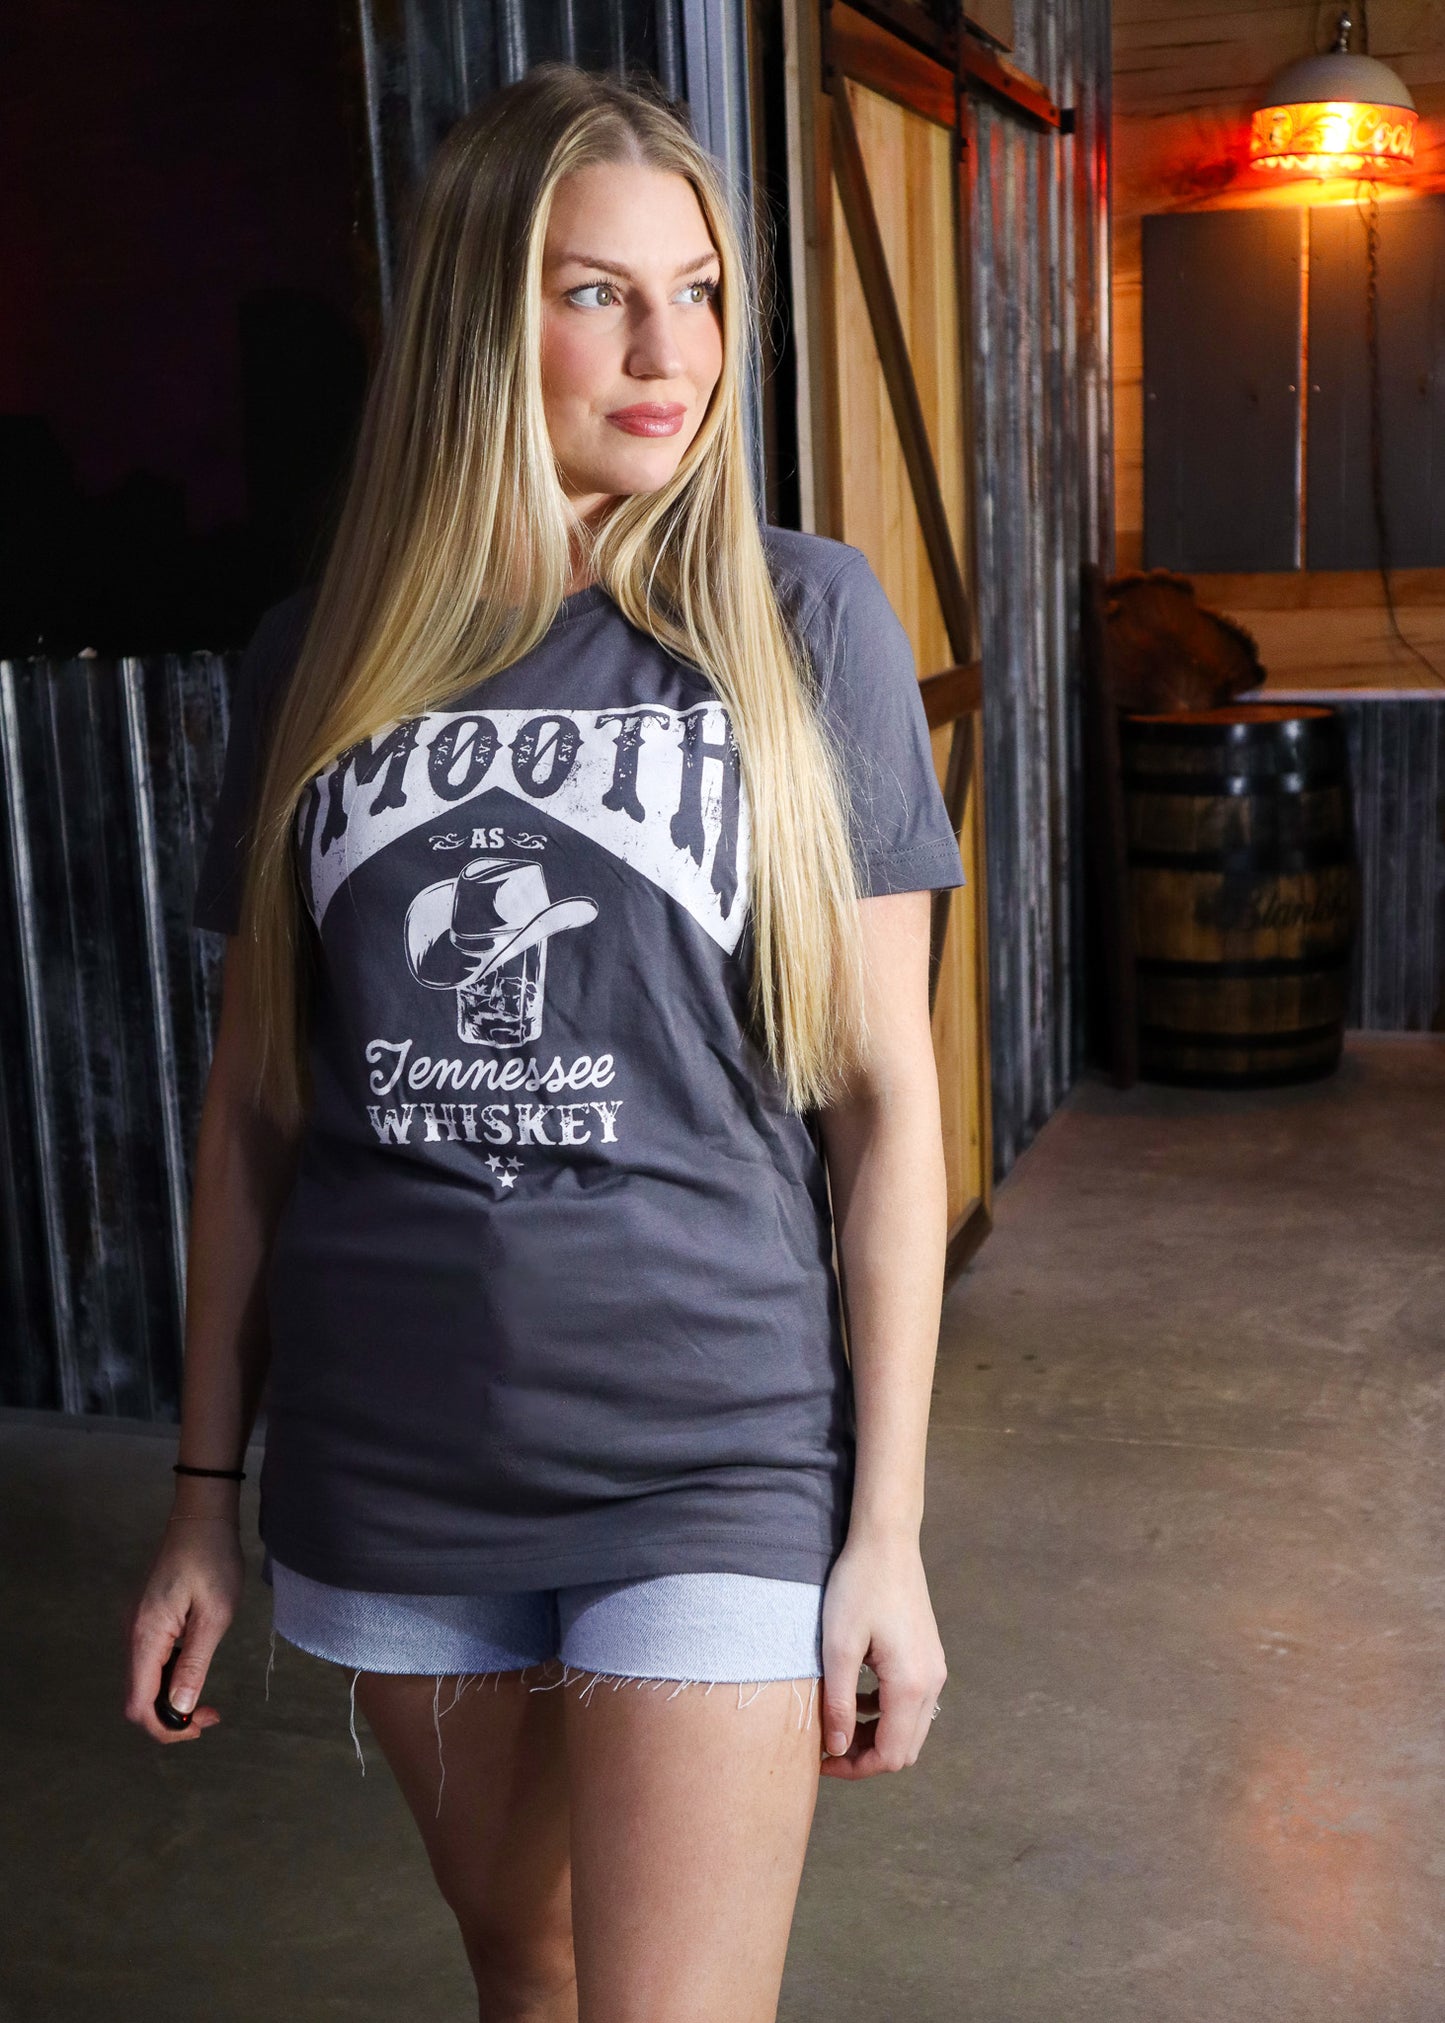 Smooth As Tennessee Whiskey Tee